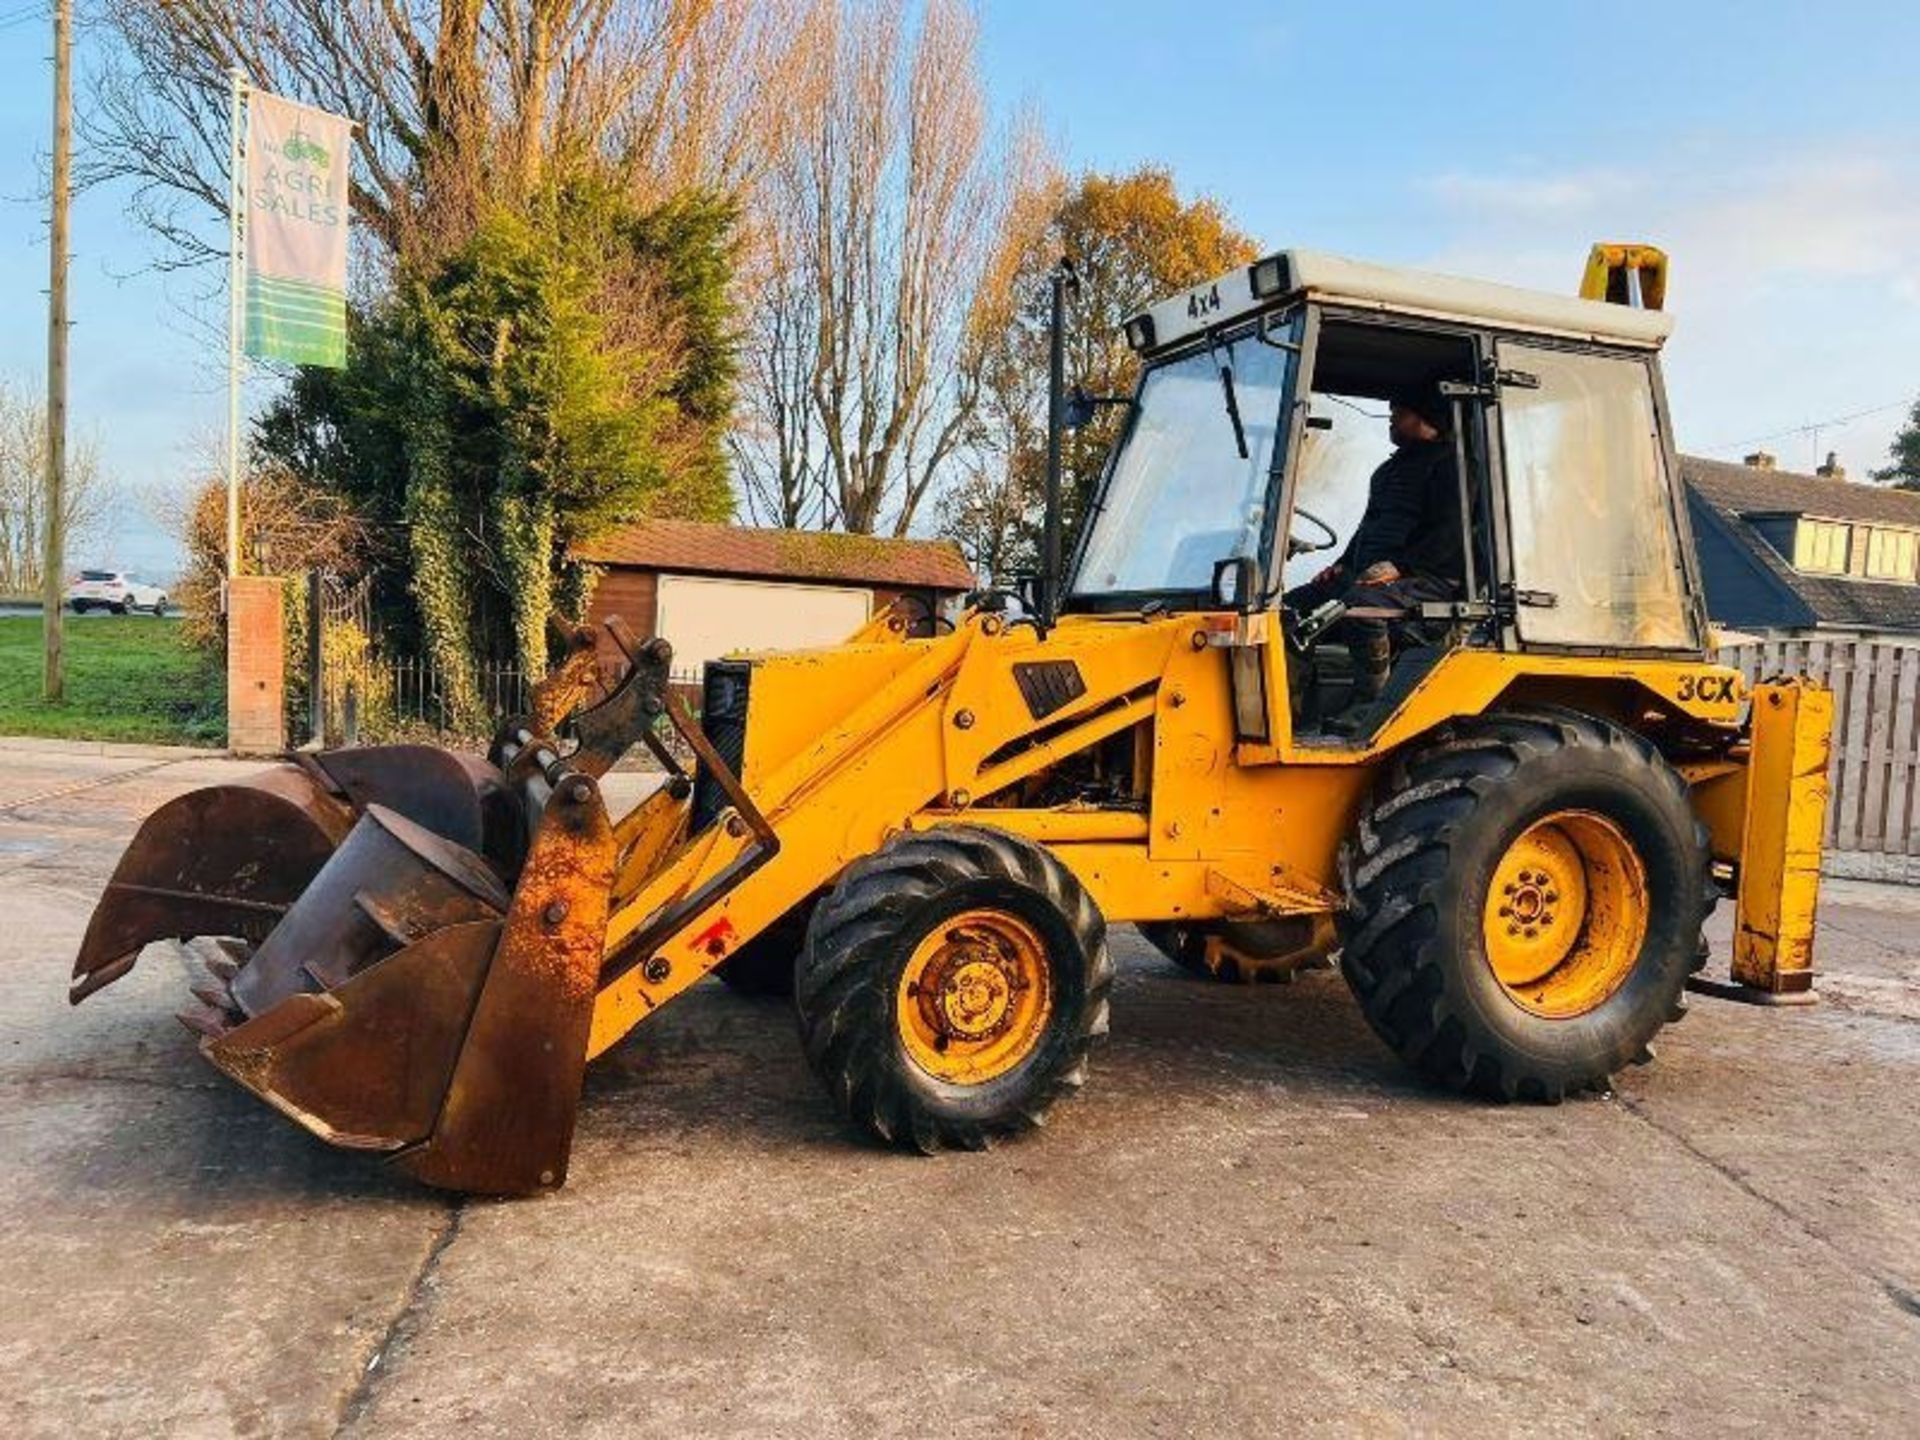 JCB 3CX PROJECT 7 4WD BACKHOE DIGGER C/W 4 X BUCKETS - Image 8 of 10